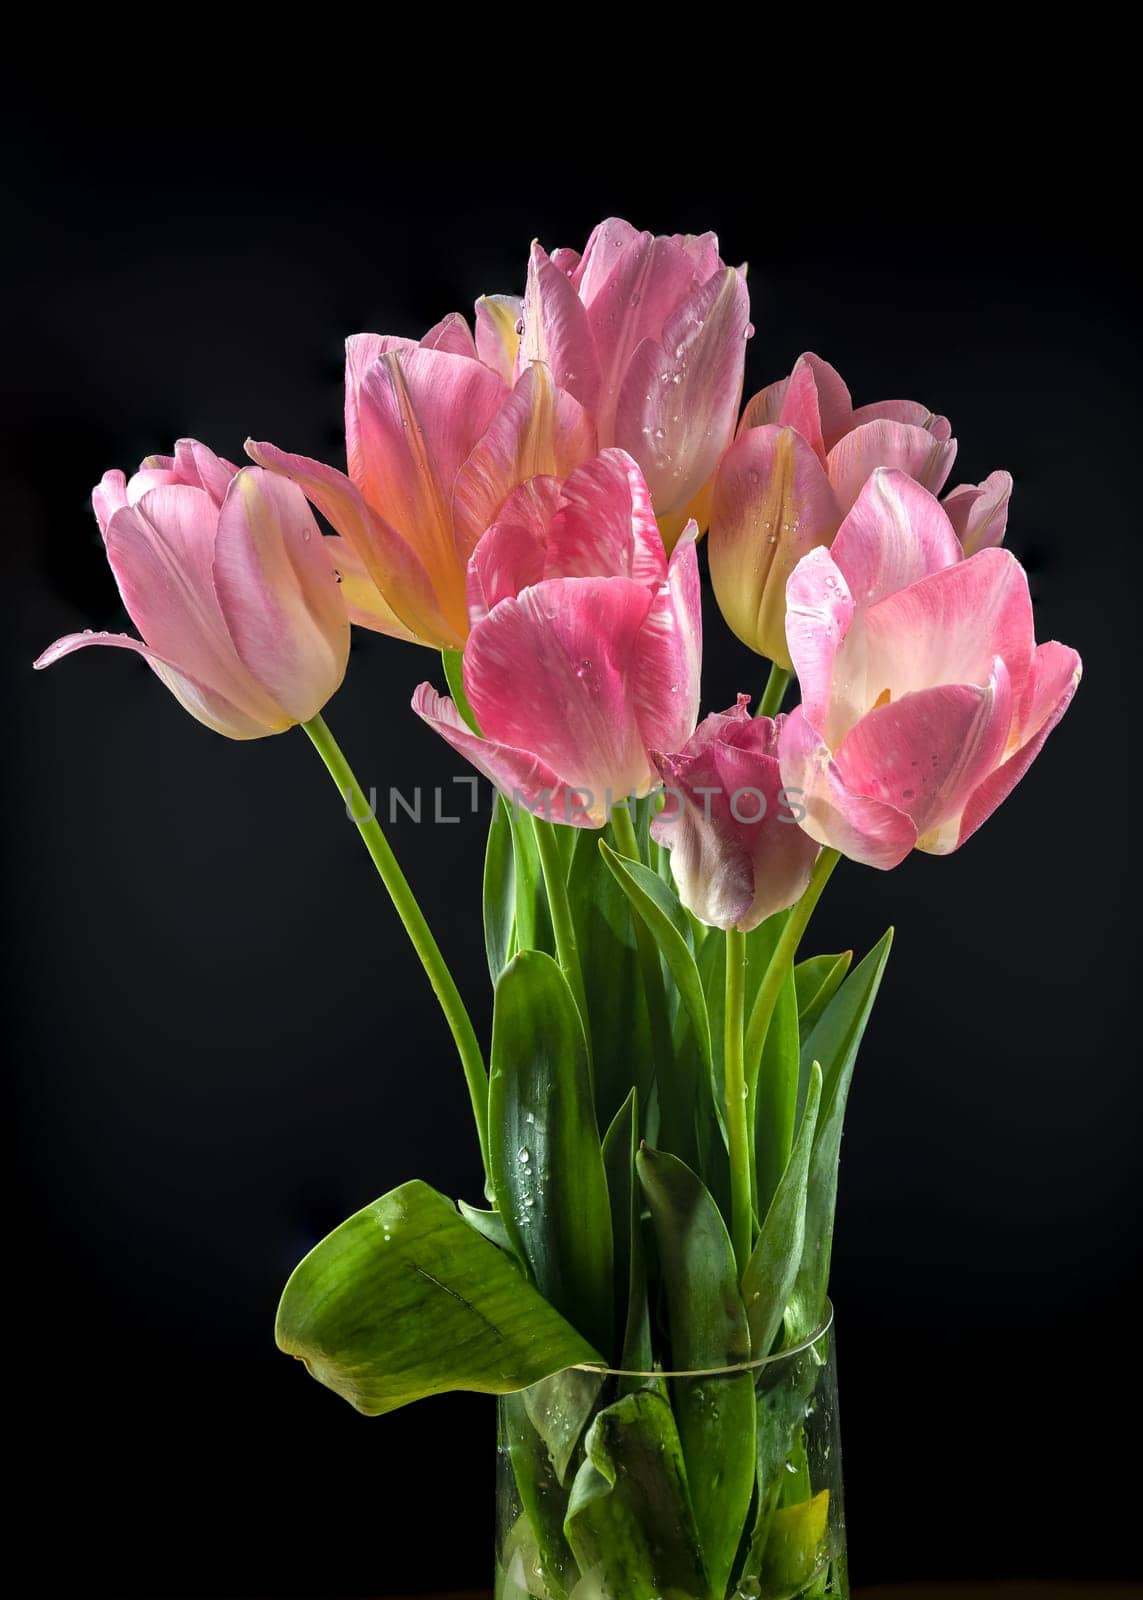 Pink tulips flowers on a black background by Multipedia